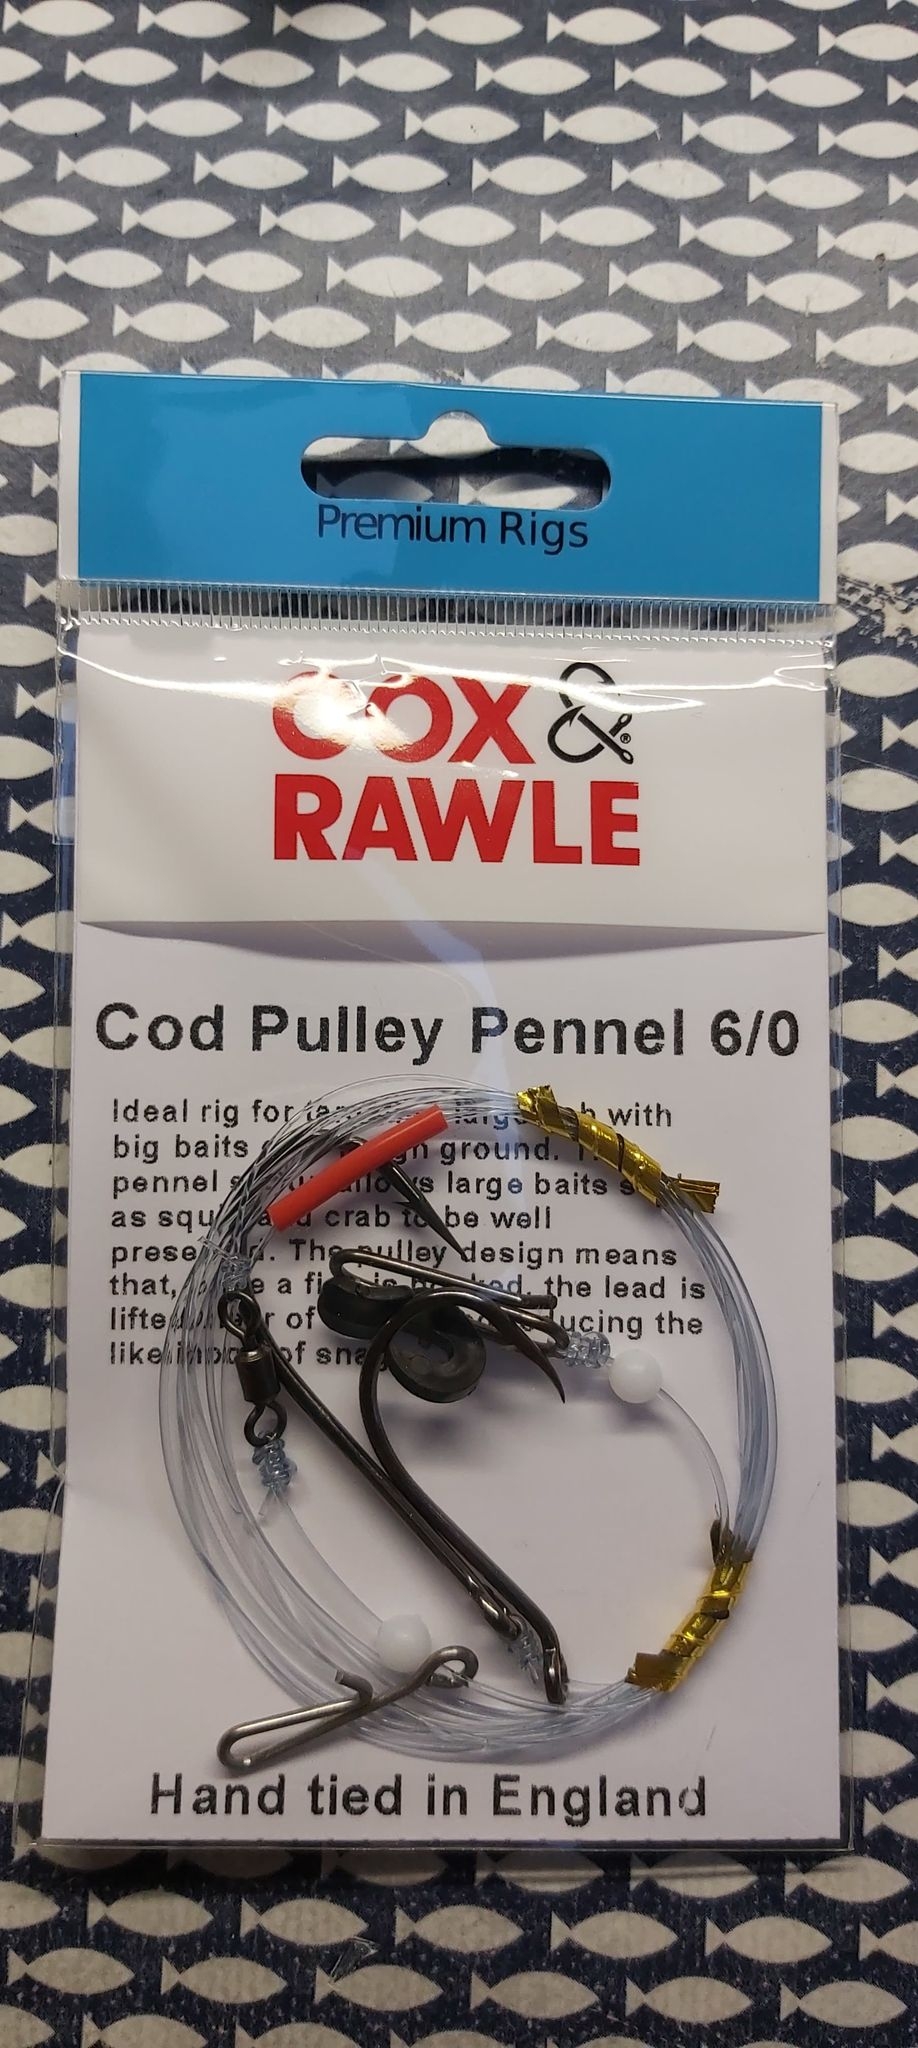 Cox & Rawle Cod Pulley Pennel rig, with IMP – 80lb/50lb – 6/0 pennel hooks